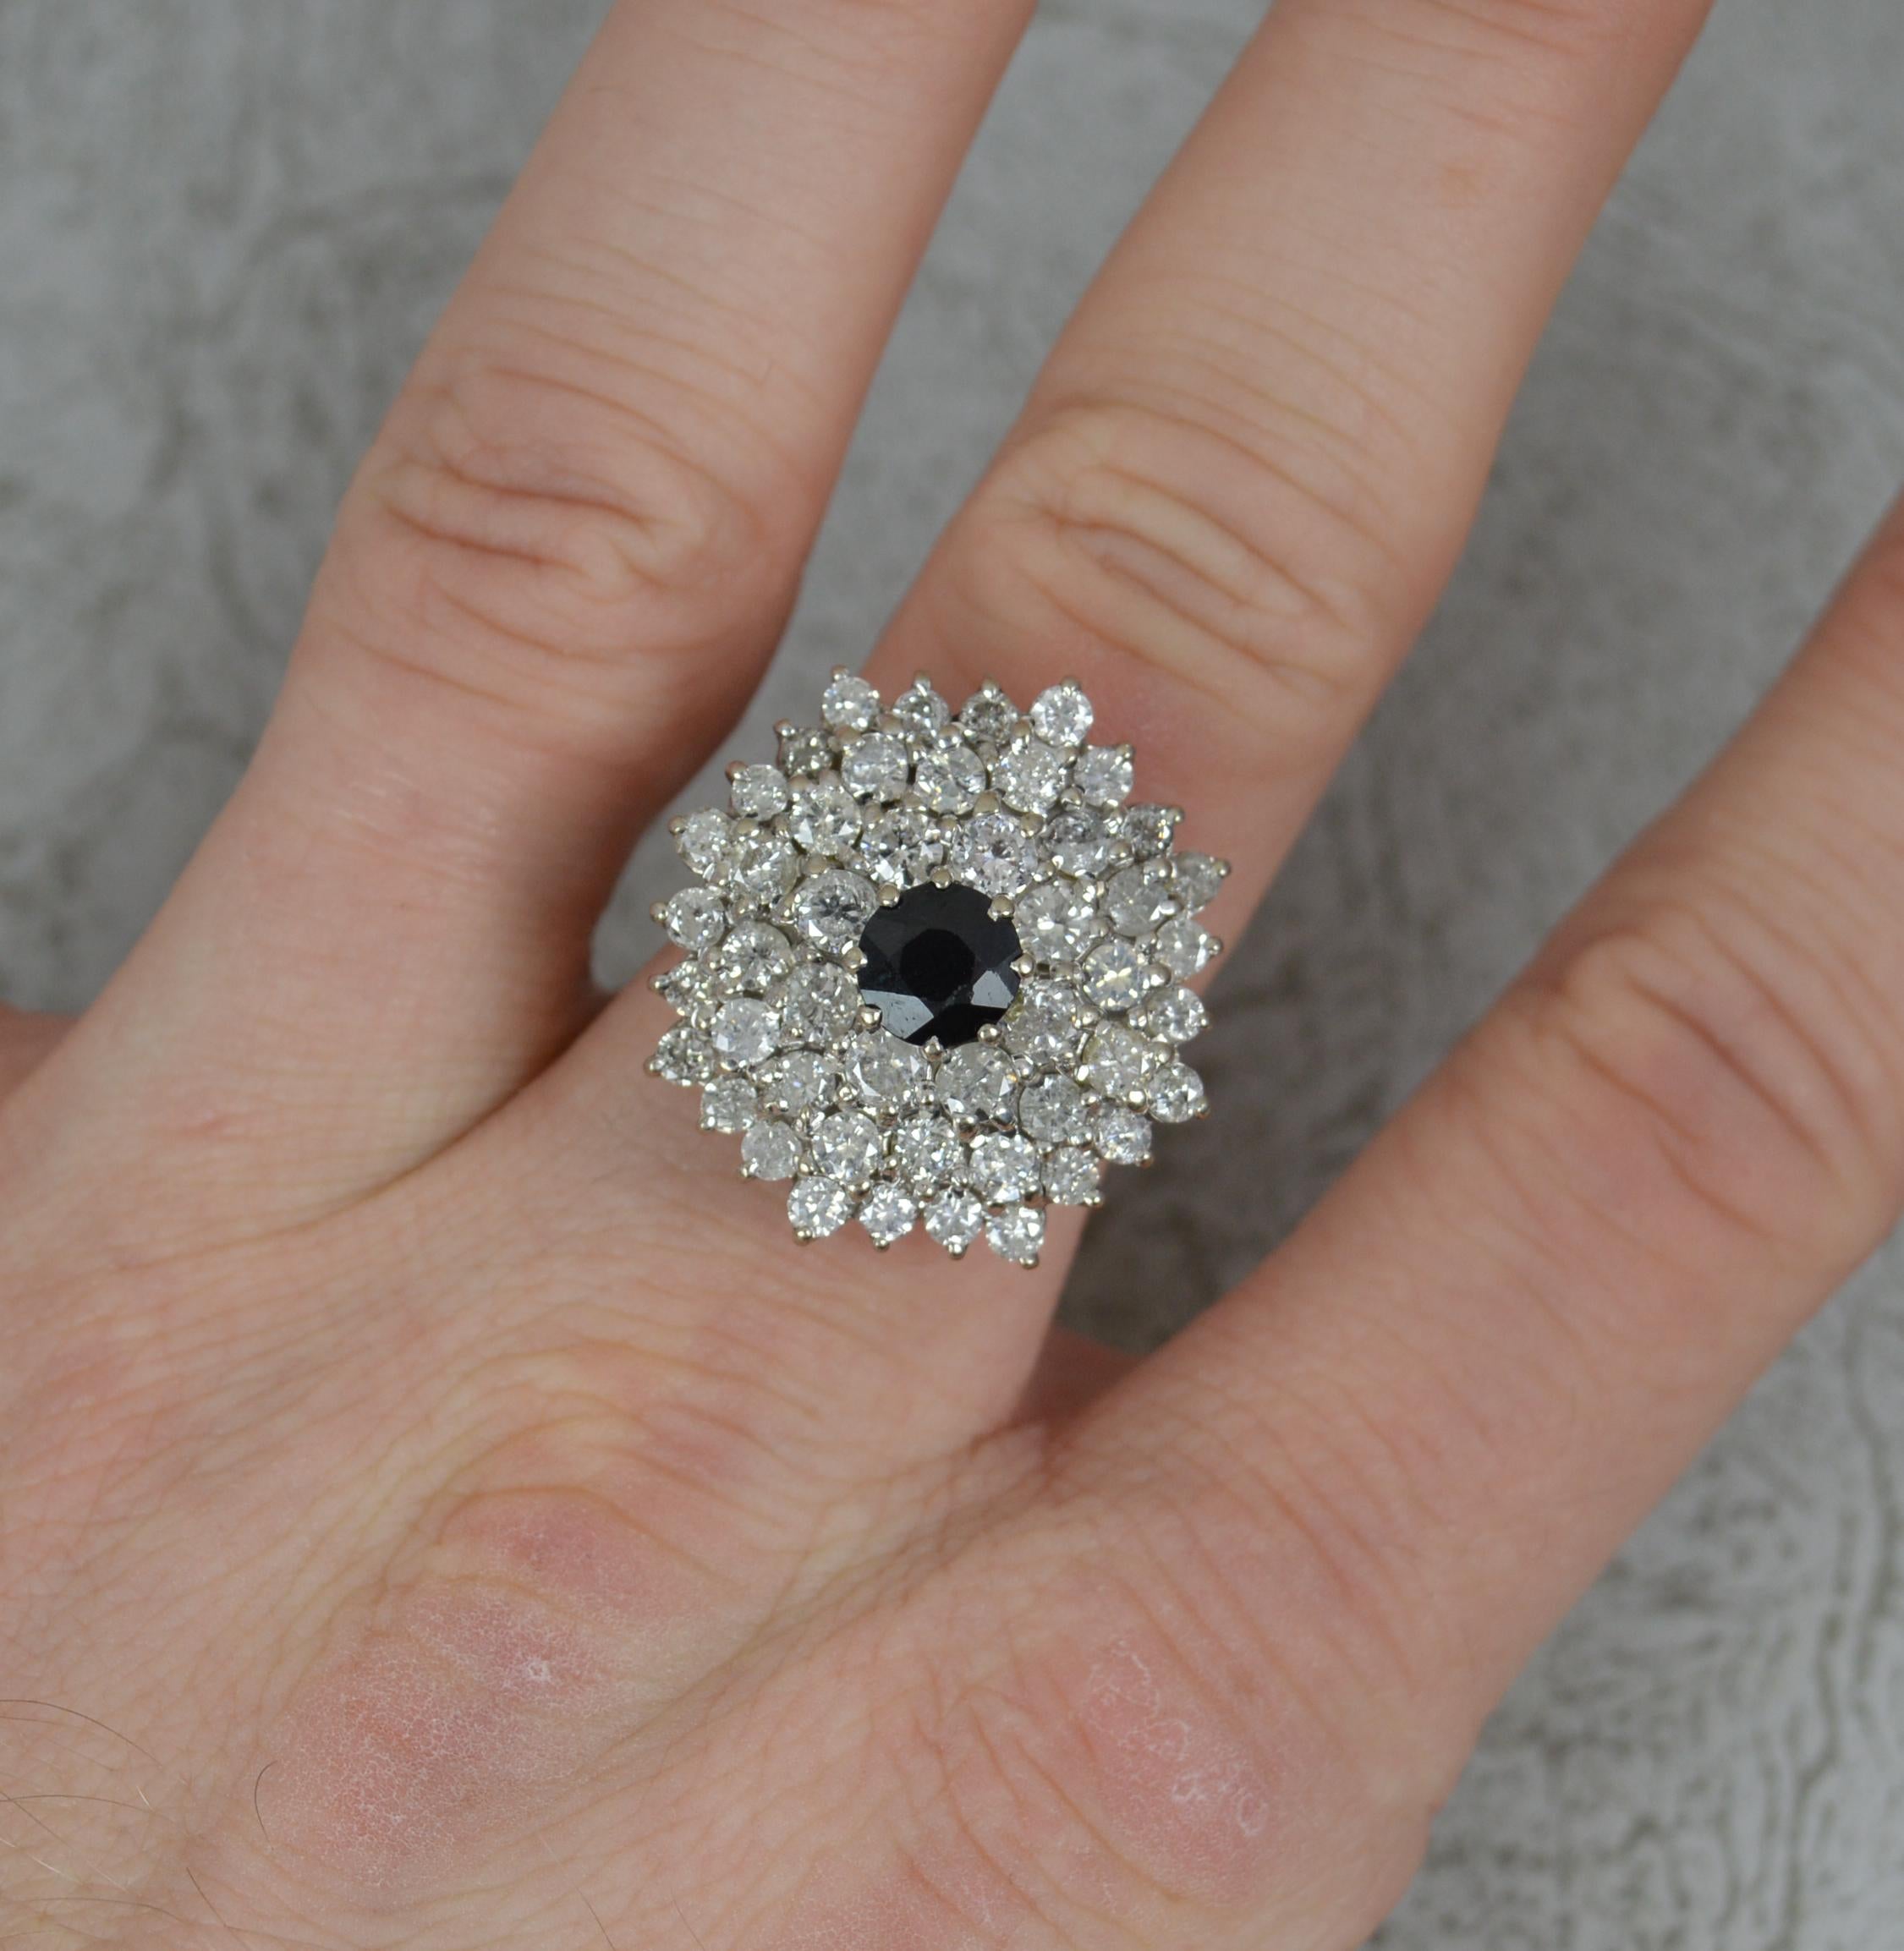 A stunning sapphire and diamond cluster ring.
Solid 18 carat white gold shank and setting.
Designed as a four tier cluster head. The hexagonal head is set with a round cut dark blue sapphire to centre with graduated round brilliant cut diamonds